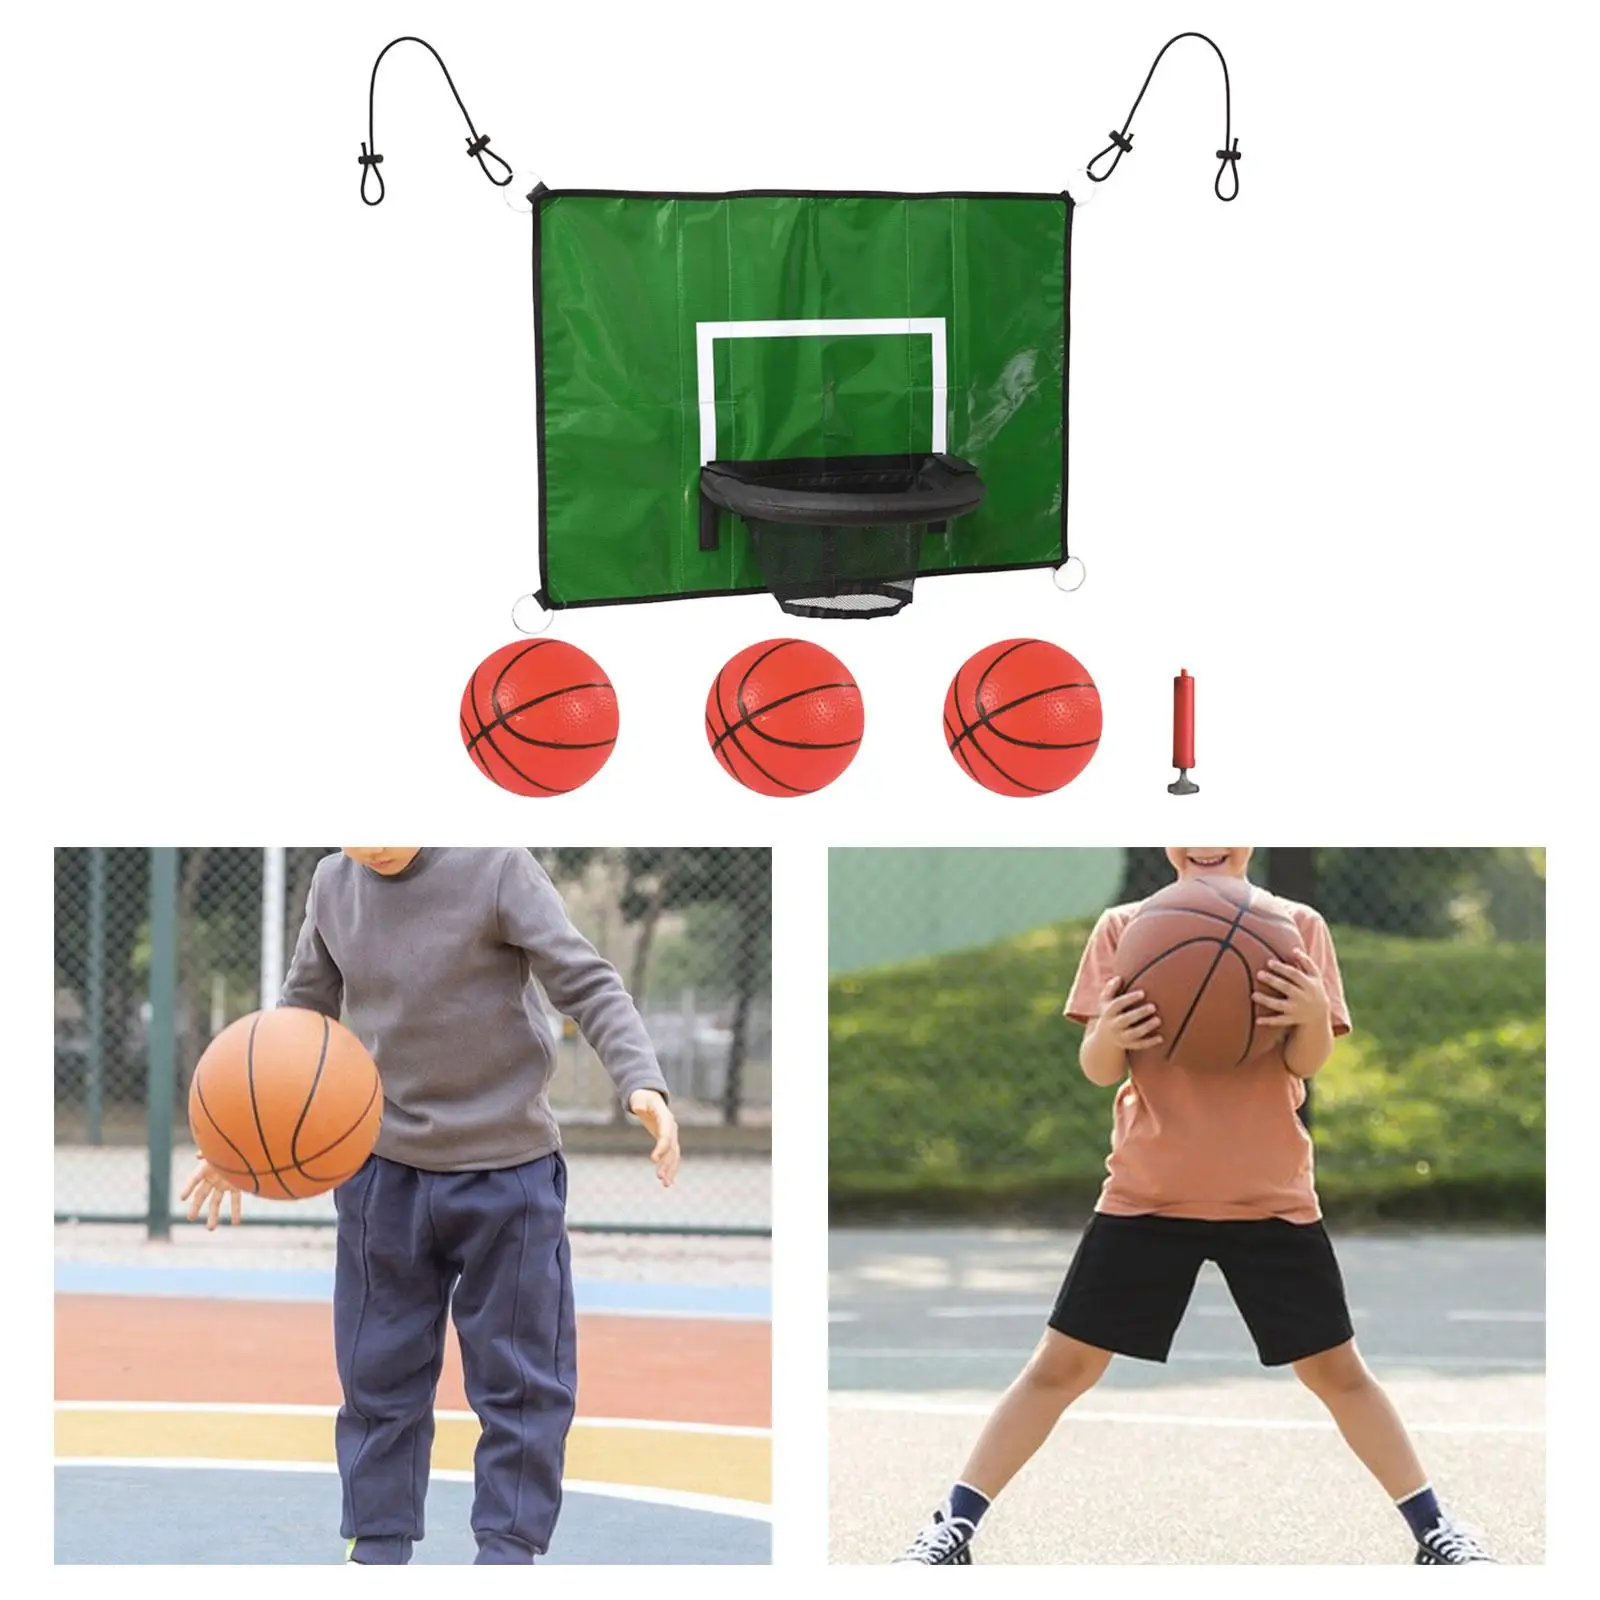 

Trampoline Basketball Hoop Goal Kit with Mini Balls for Kids Adults Game Accessory Waterproof Portable